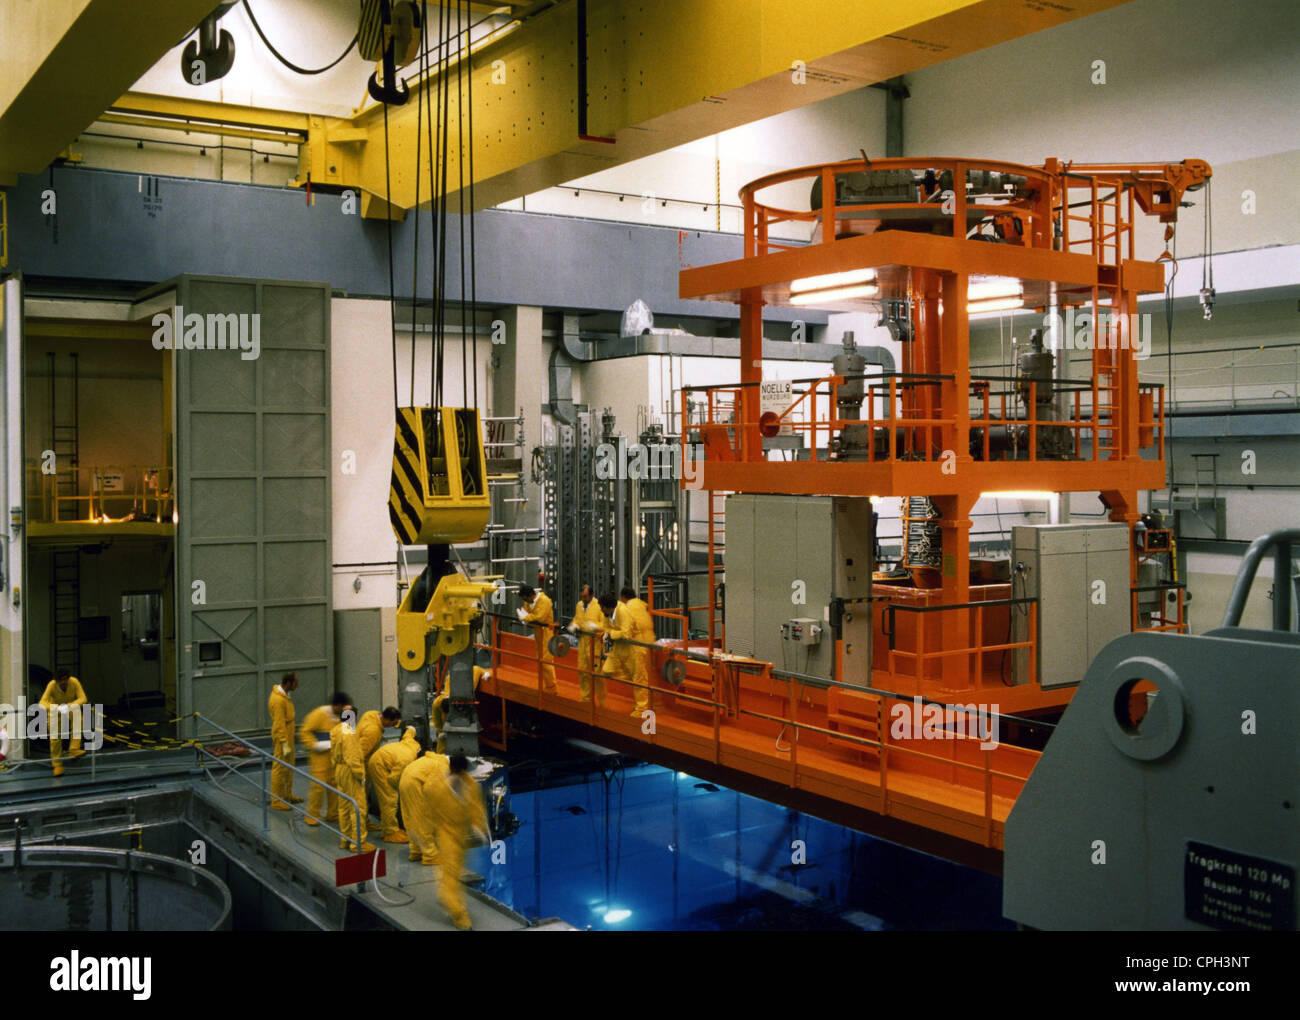 energy, nuclear power, nuclear power plant, Isar 1, Markt Essenbach, Lower Bavaria, Germany, interior view, refueling machine, fuel assembly store, during a revision, 1991, inspection, check, people, labour, working, technicians, technics, Ohu, electricity, 1990s, 90s, 20th century, historic, historical, Additional-Rights-Clearences-Not Available Stock Photo